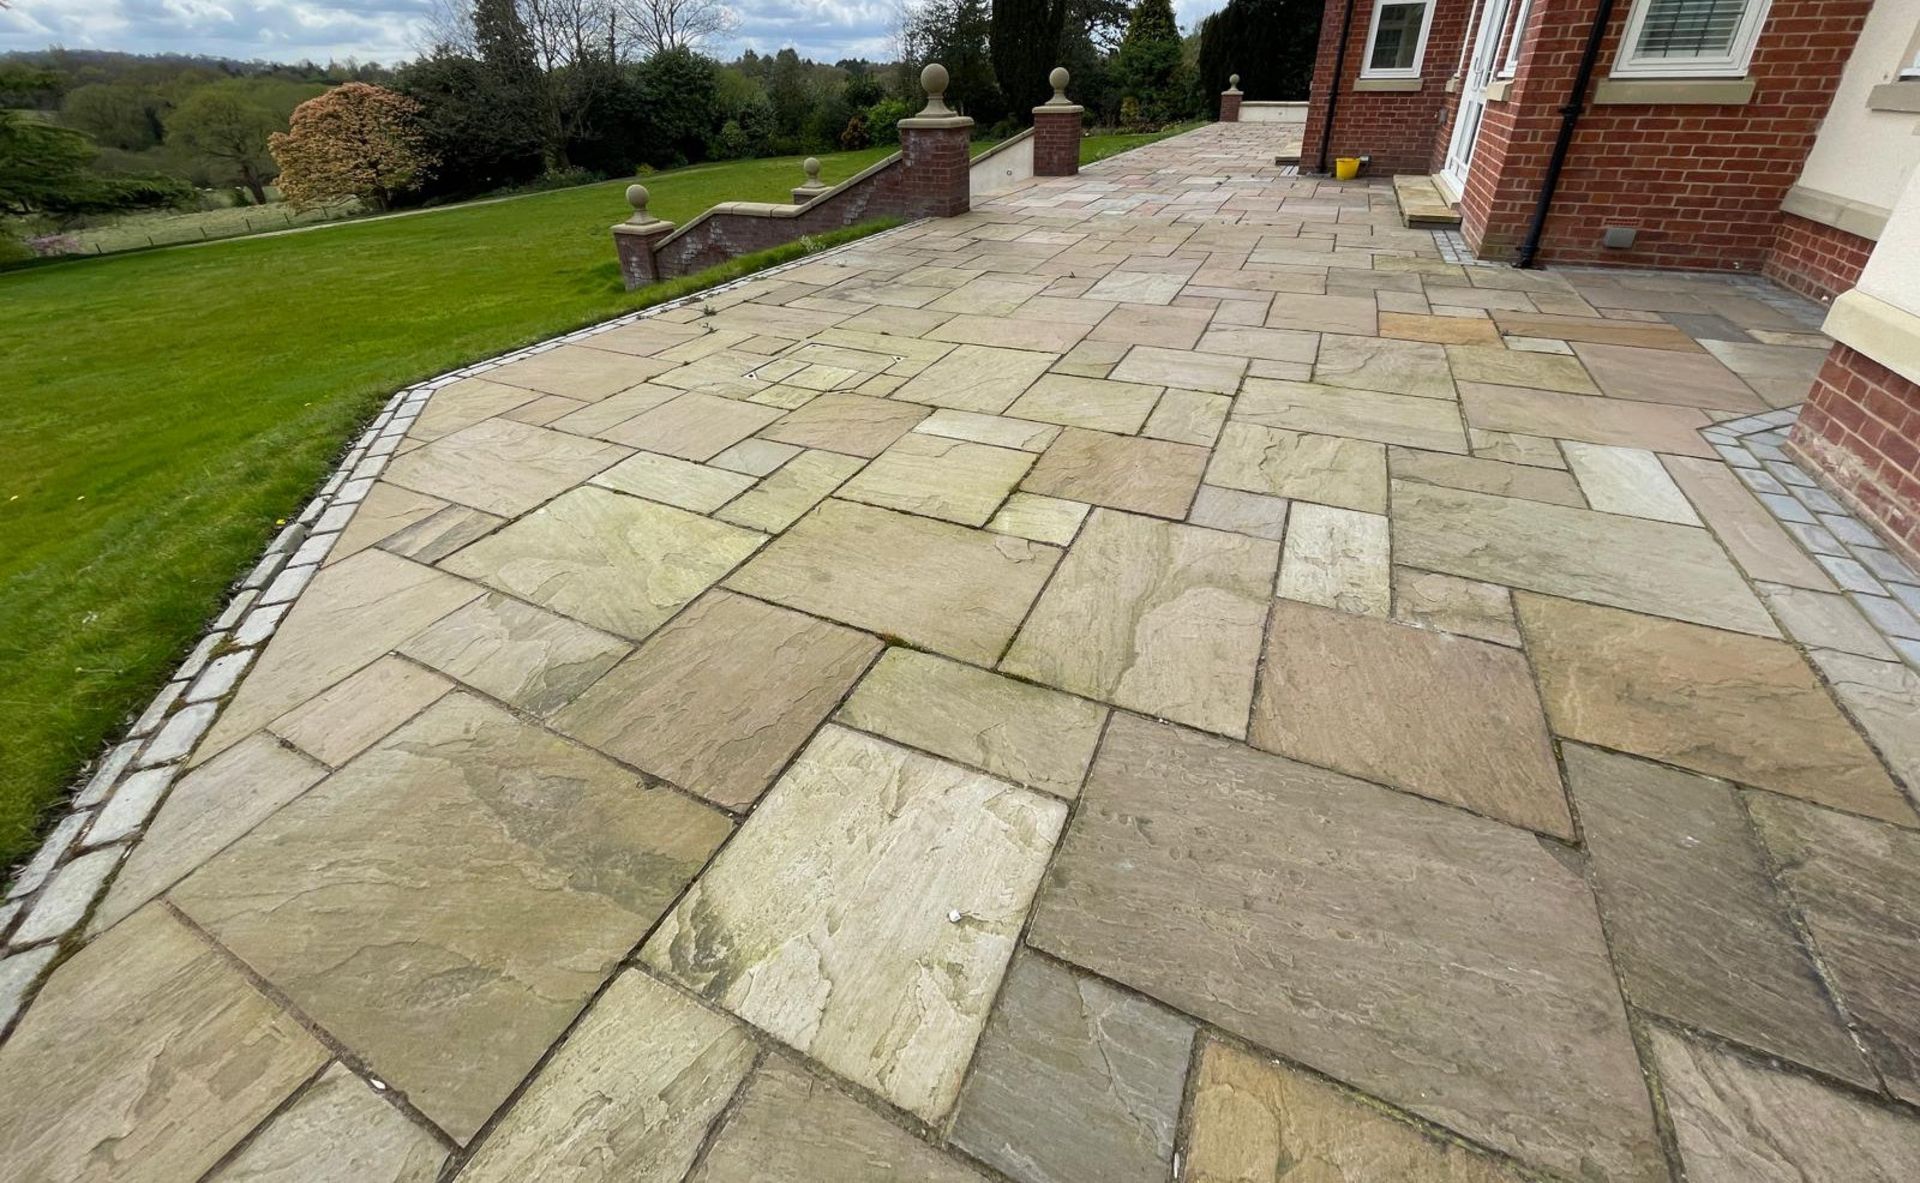 Large Quantity of Yorkstone Paving - Over 340sqm - CL896 - NO VAT ON THE HAMMER - Location: Wilmslow - Image 49 of 57